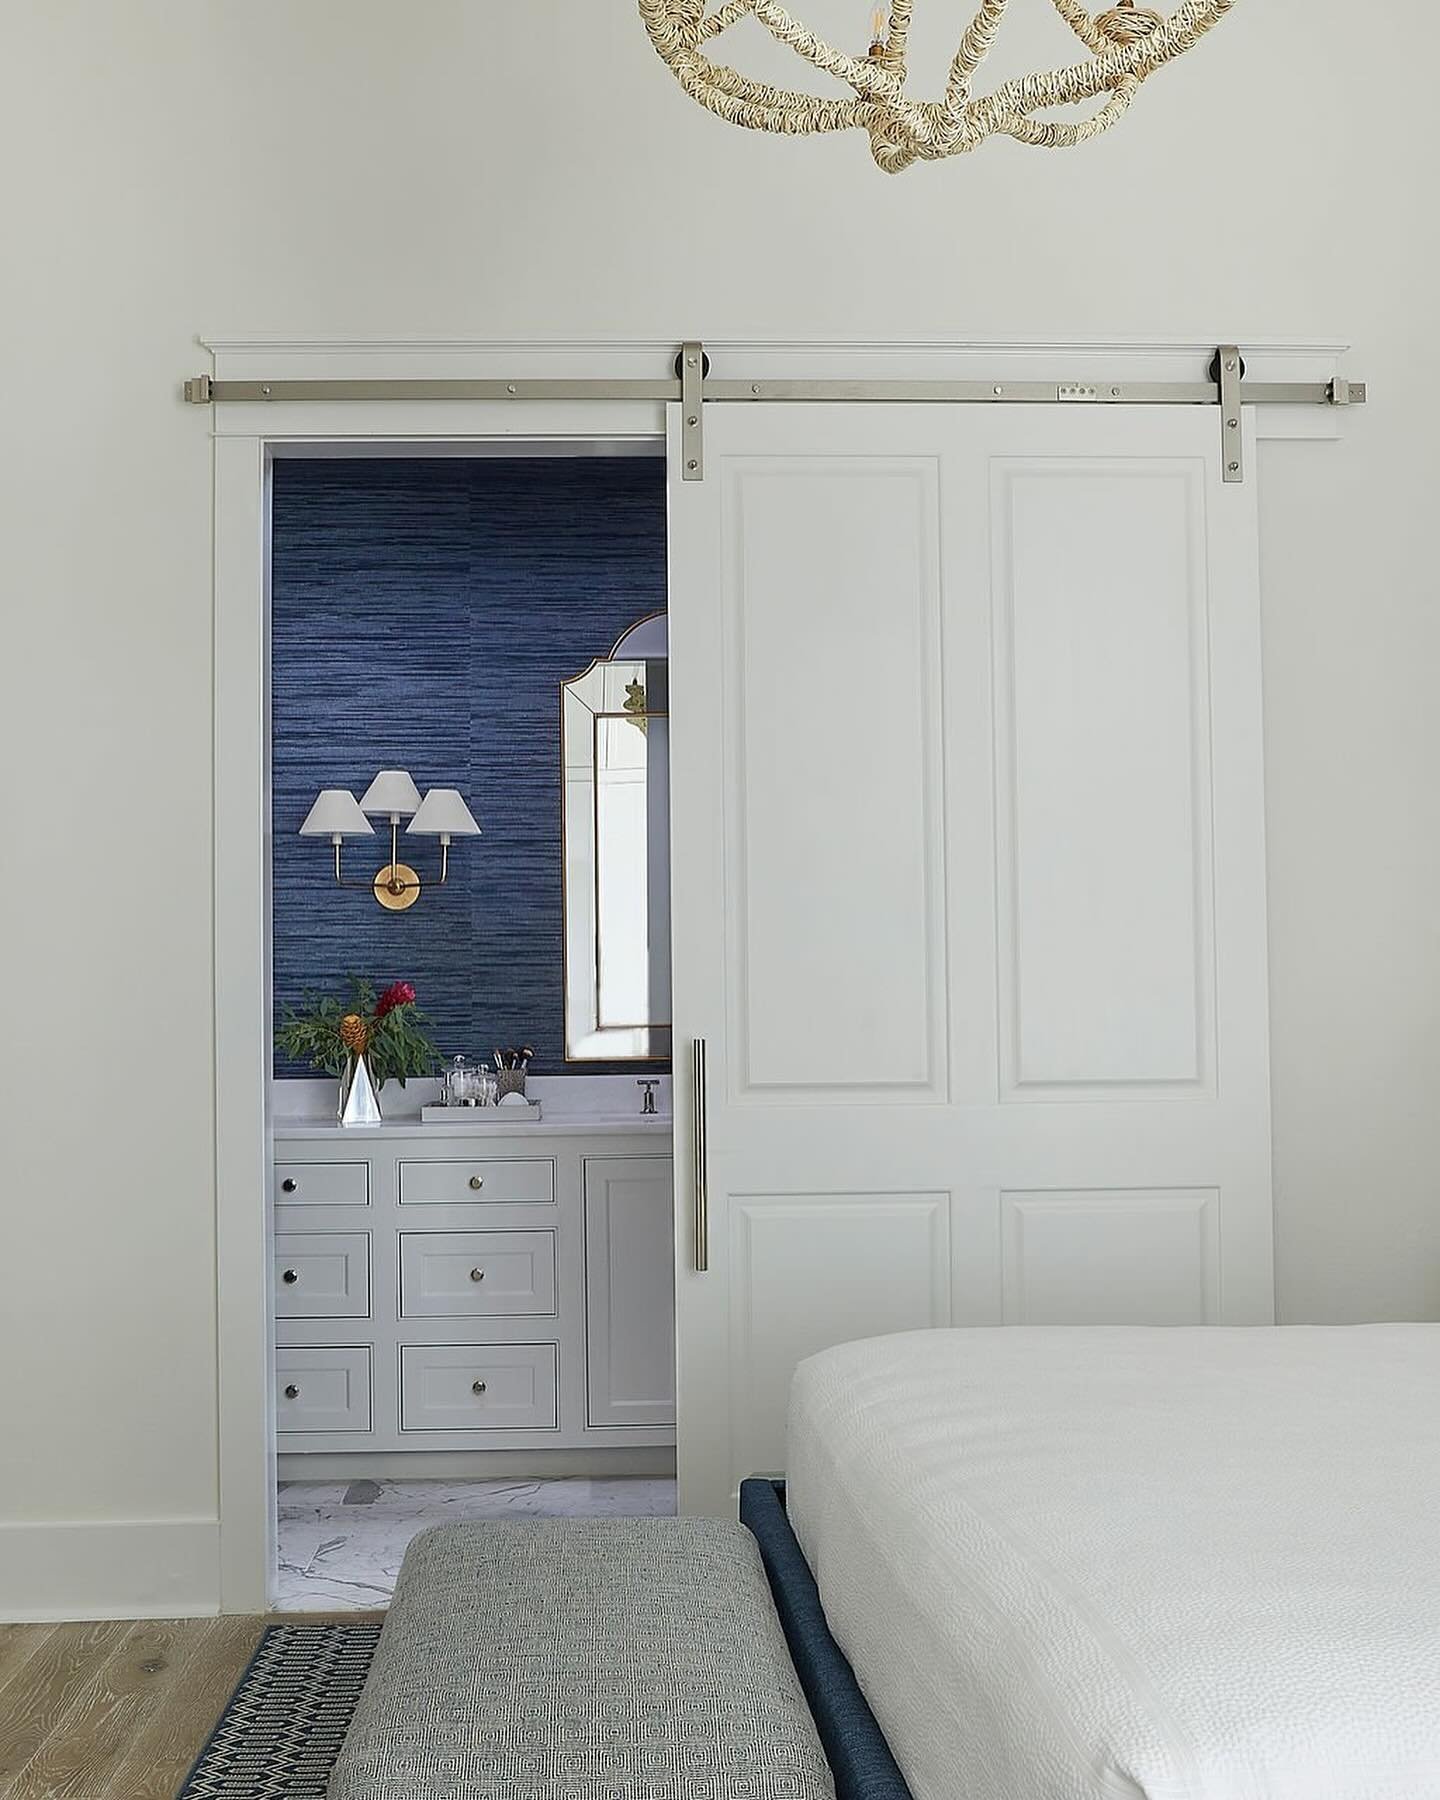 Swipe to see more of what&rsquo;s behind the sliding door&hellip; 💙

Design by @lpdesignlove 
Photos by @jallsopp 
Styling by @martytsmith

#summerhousestyle #interiordesign #bathroomdesign